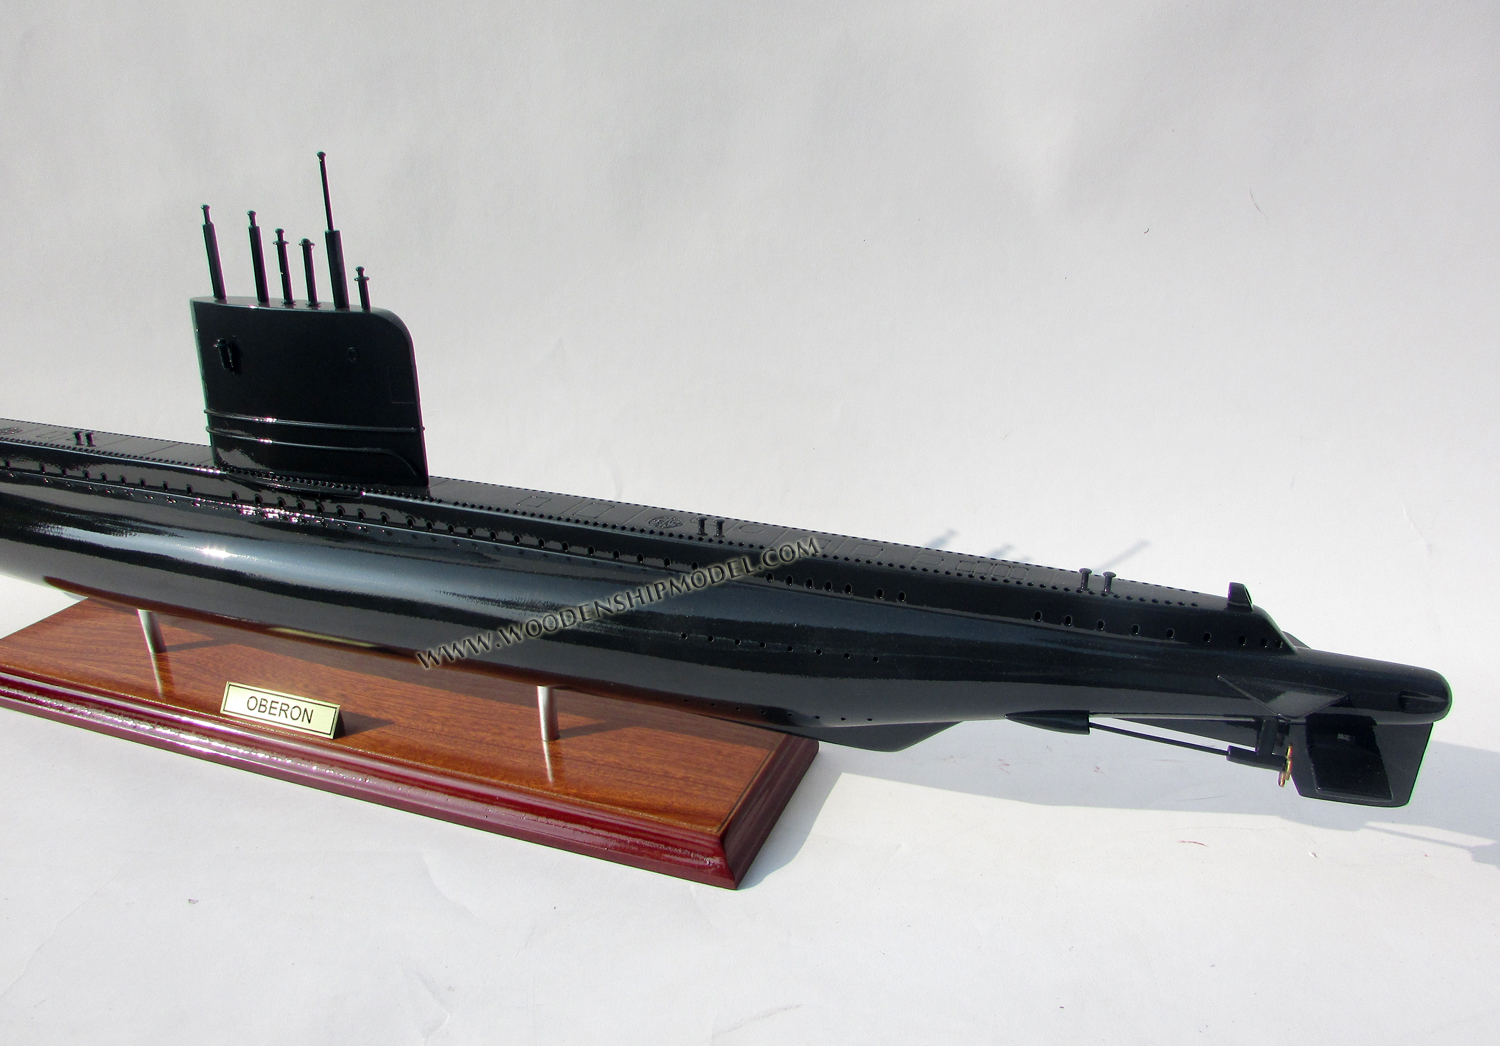 Collins Submarine Model Ship ready for display